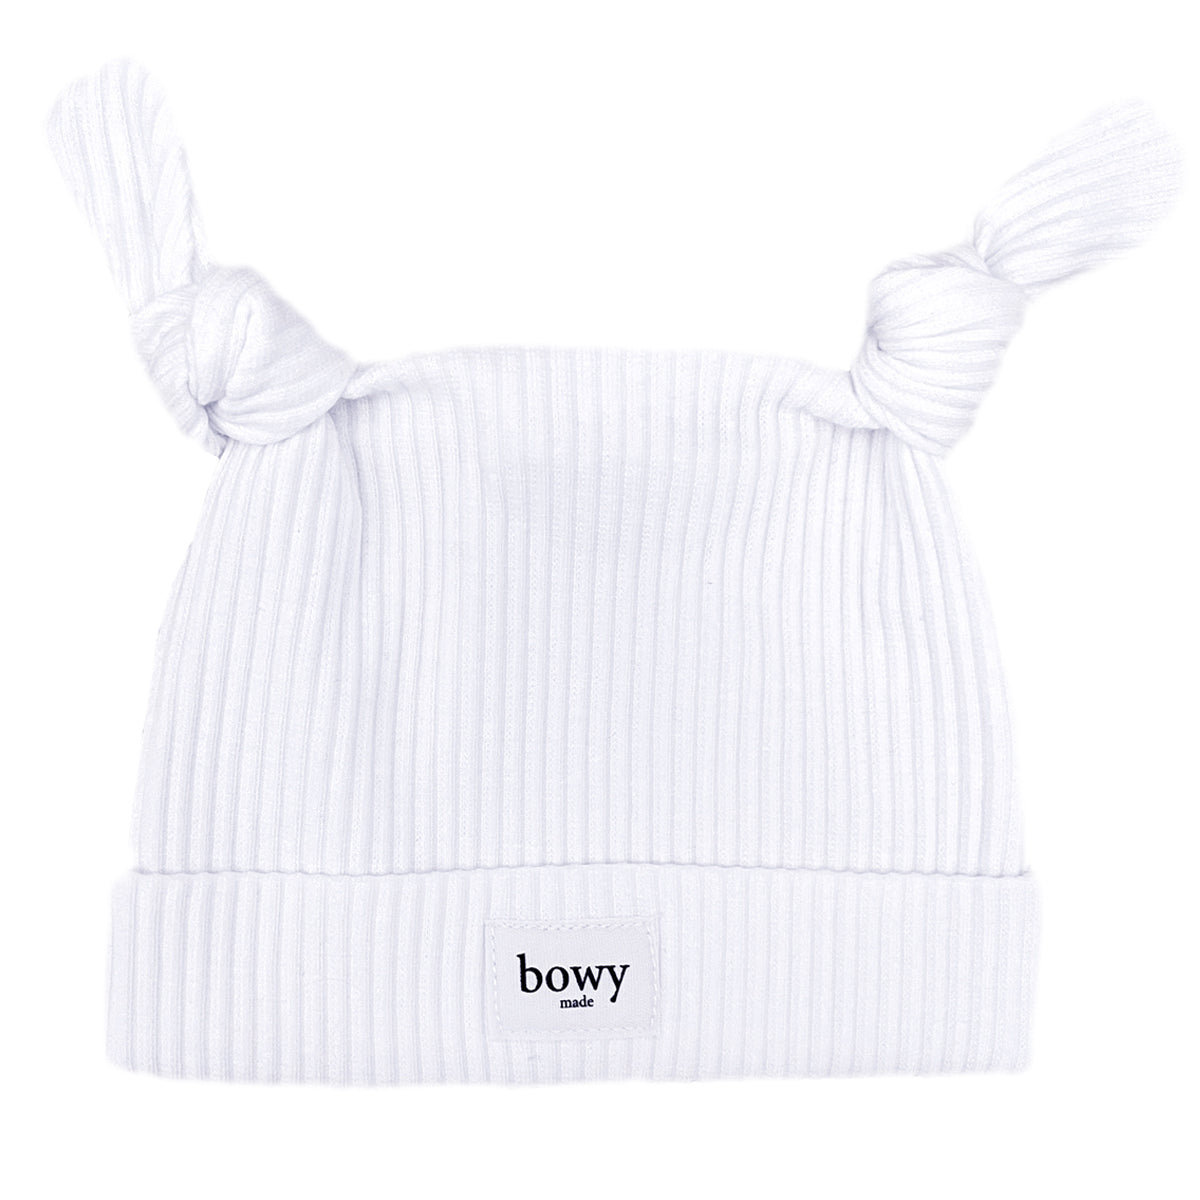 Bowy Made Double Knot Beanie - White